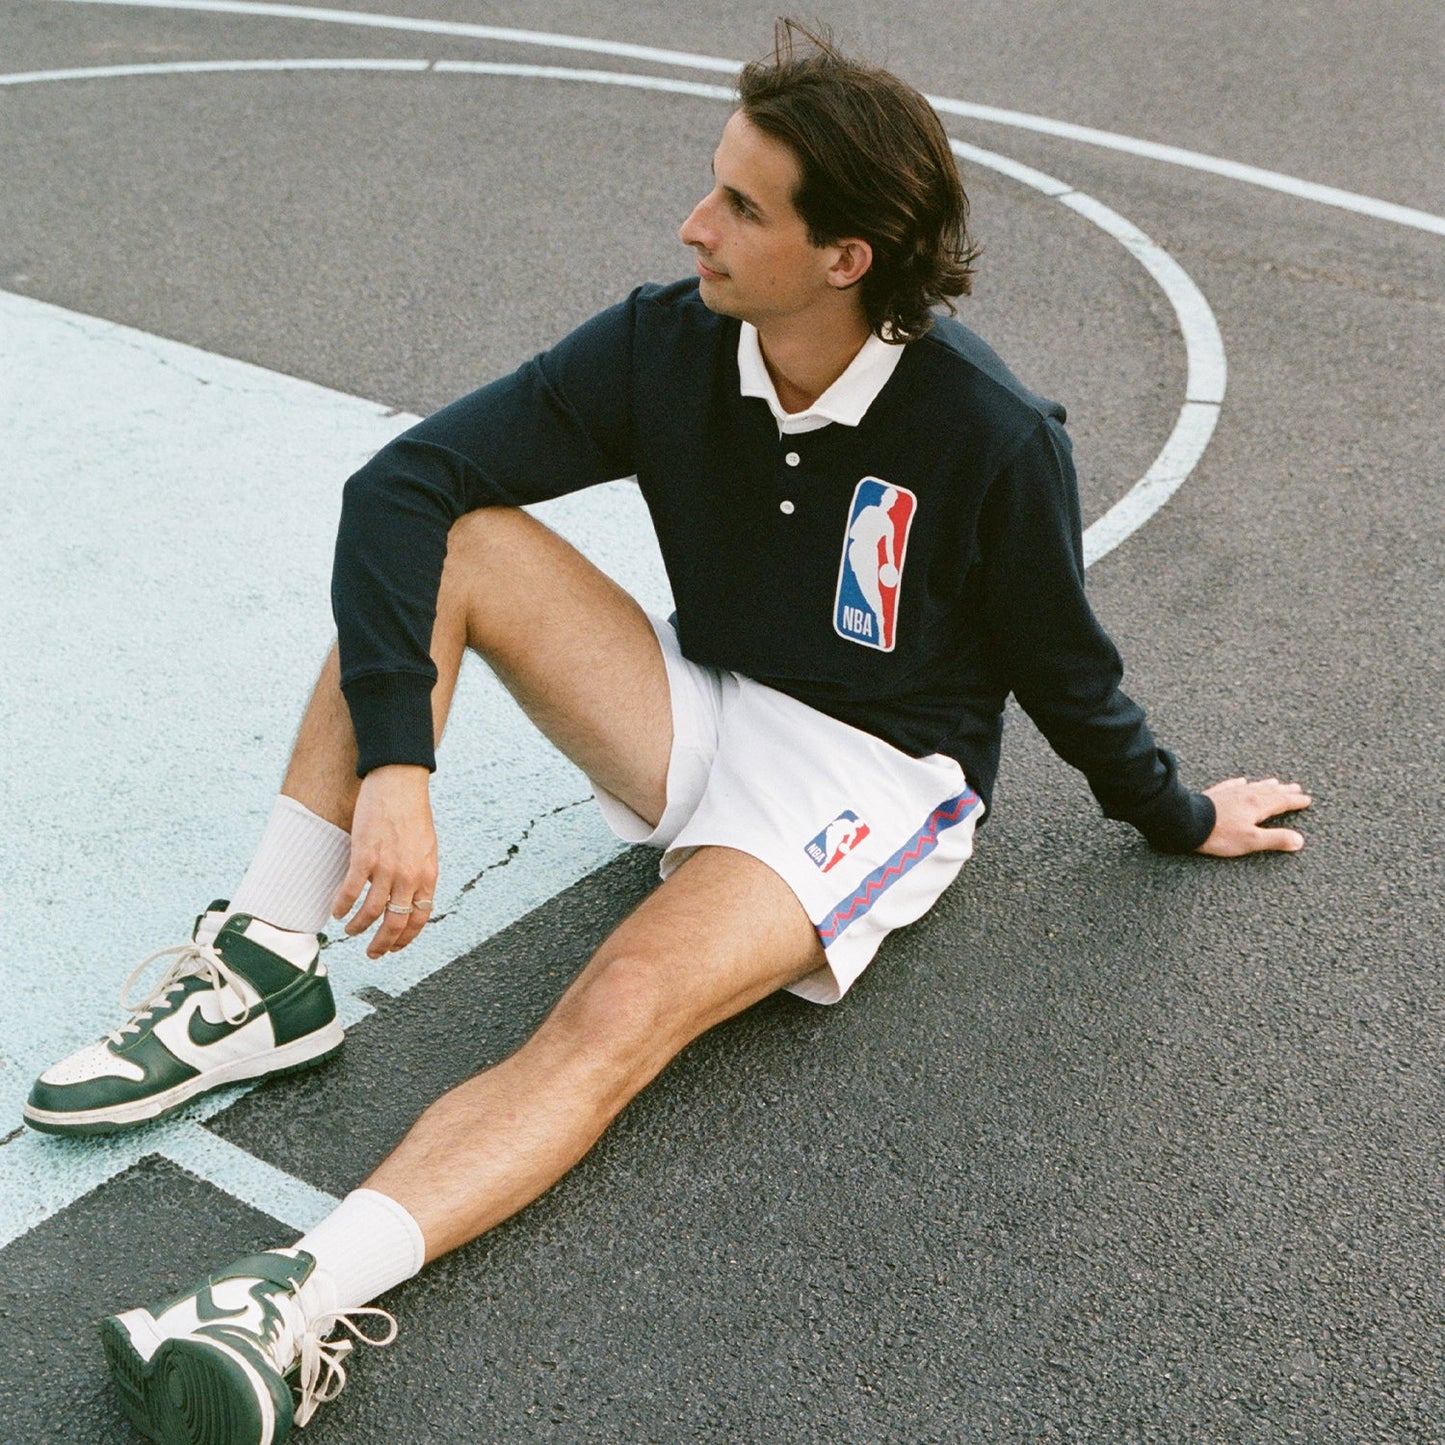 Rowing Blazers x NBA Logo Solid Rugby